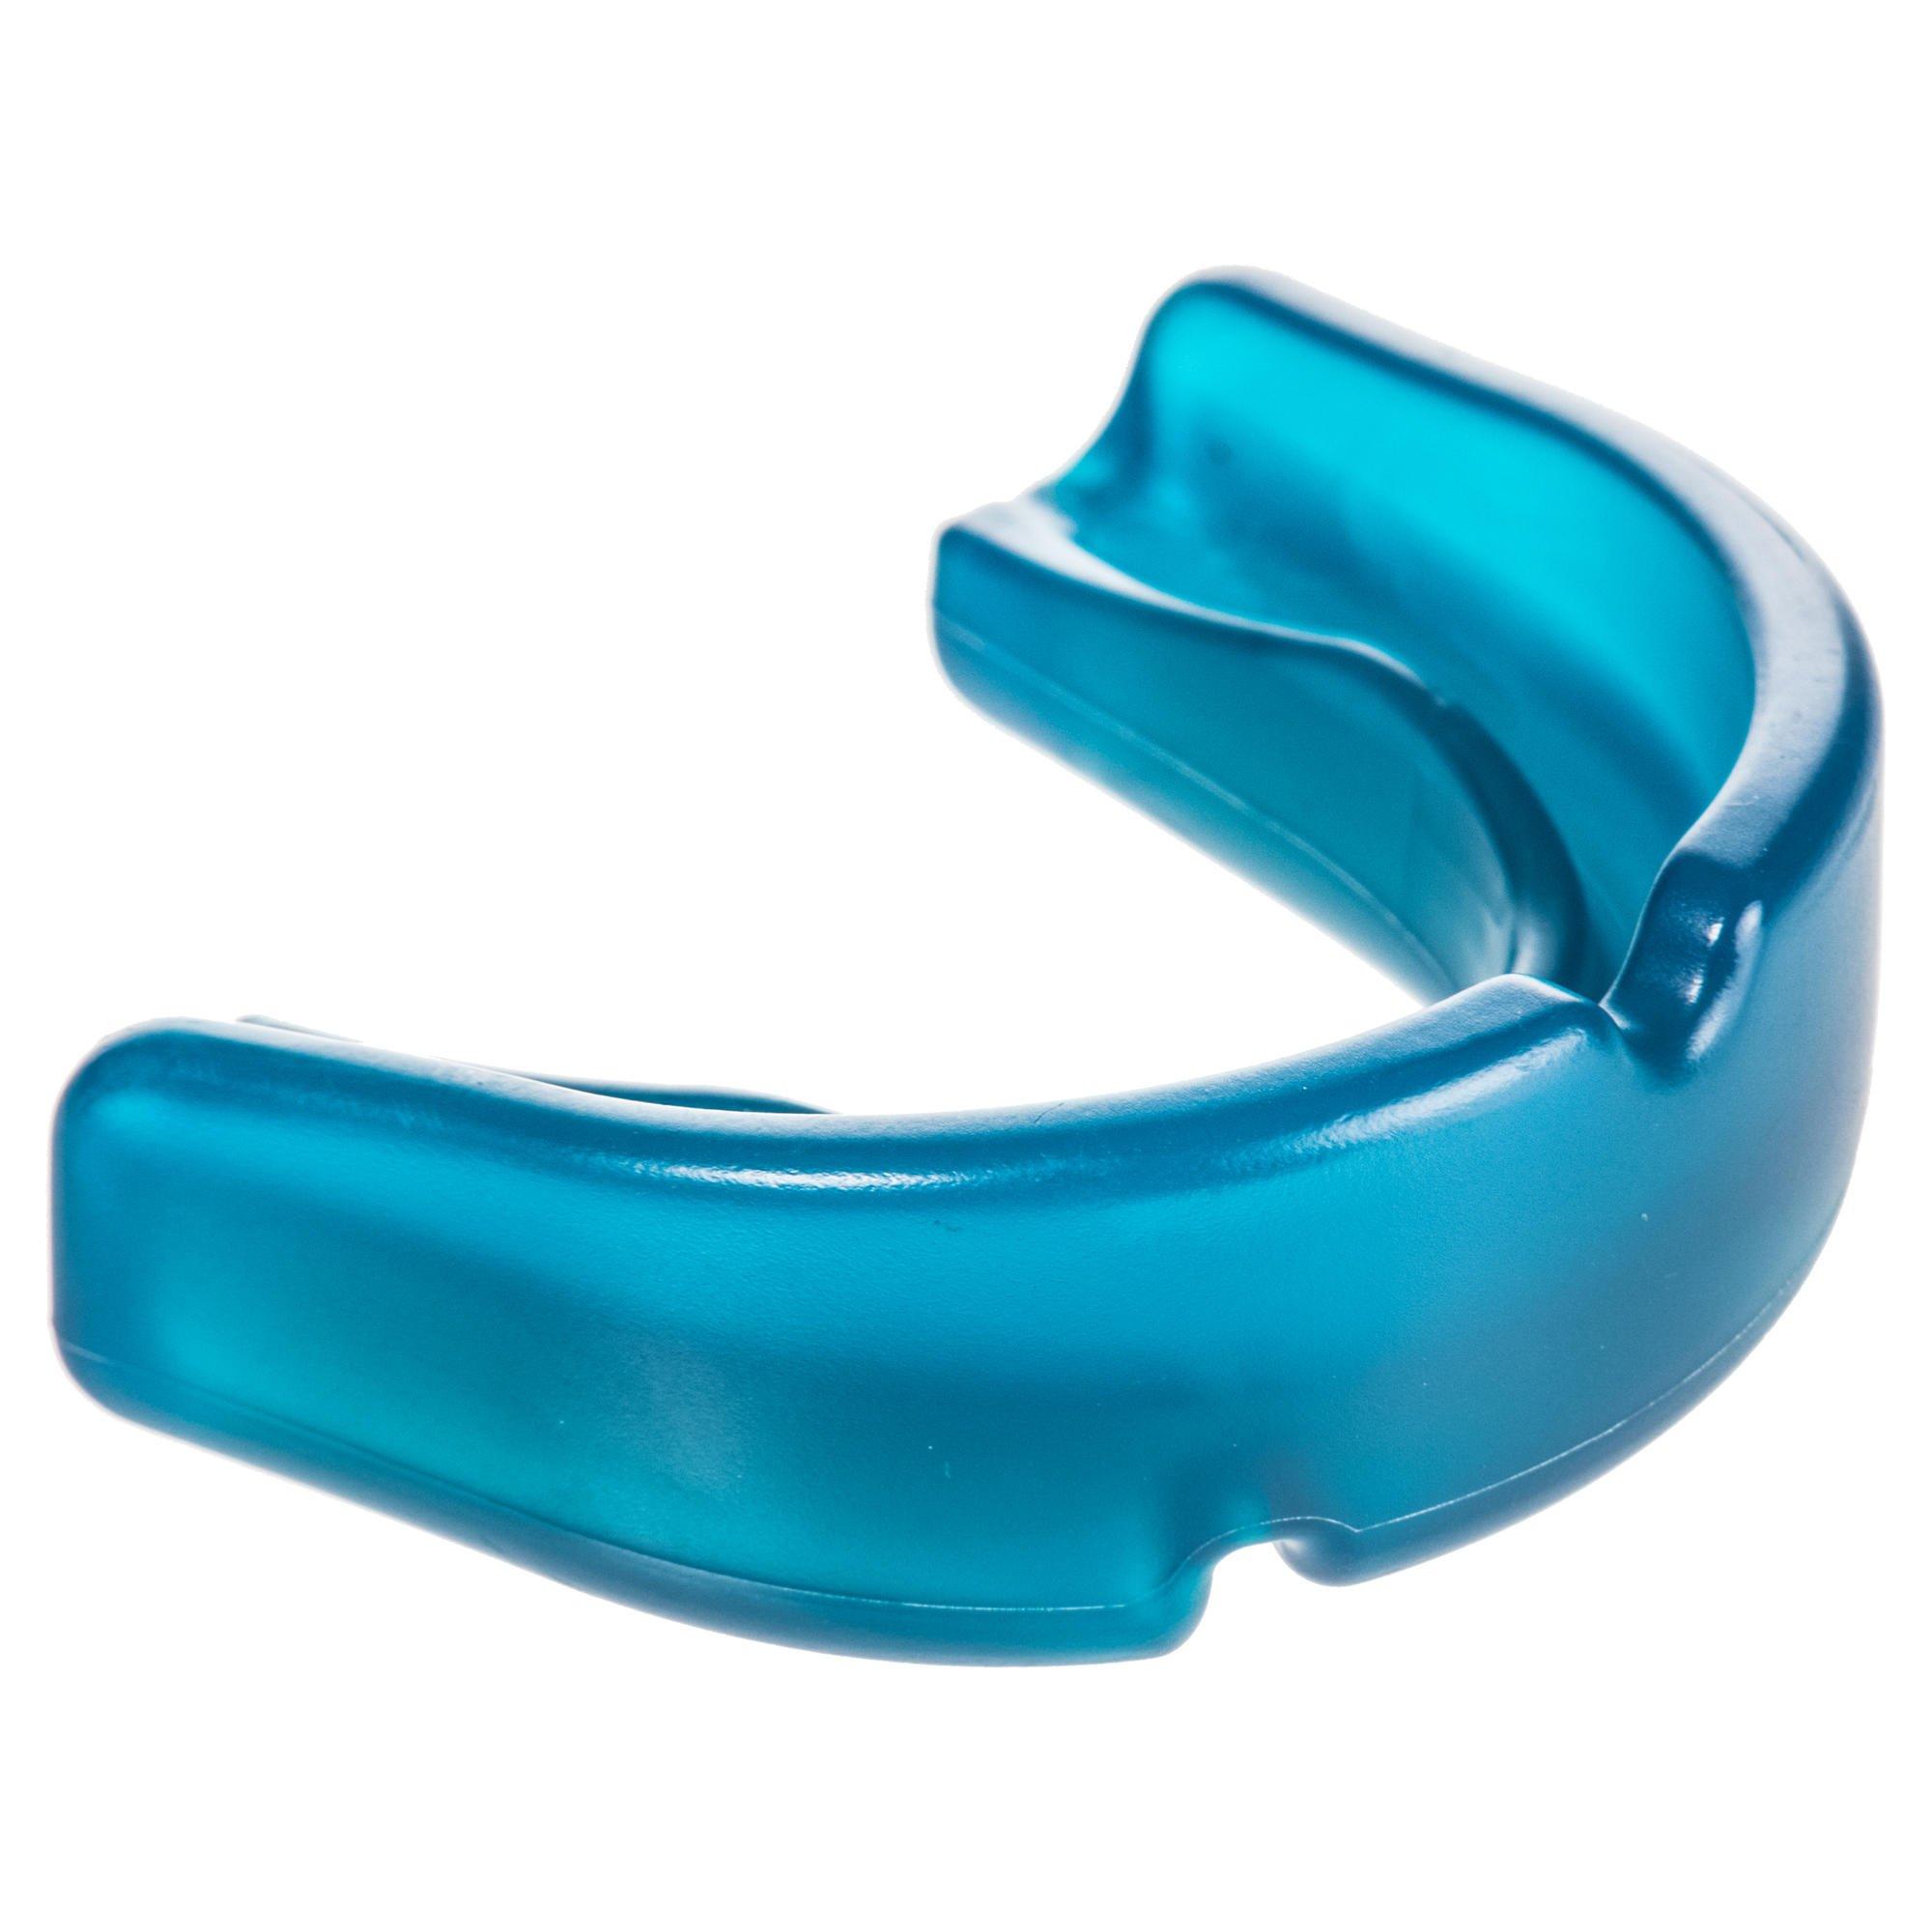 Decathlon Fh100 Adult Large Low-Intensity Field Hockey Mouthguard